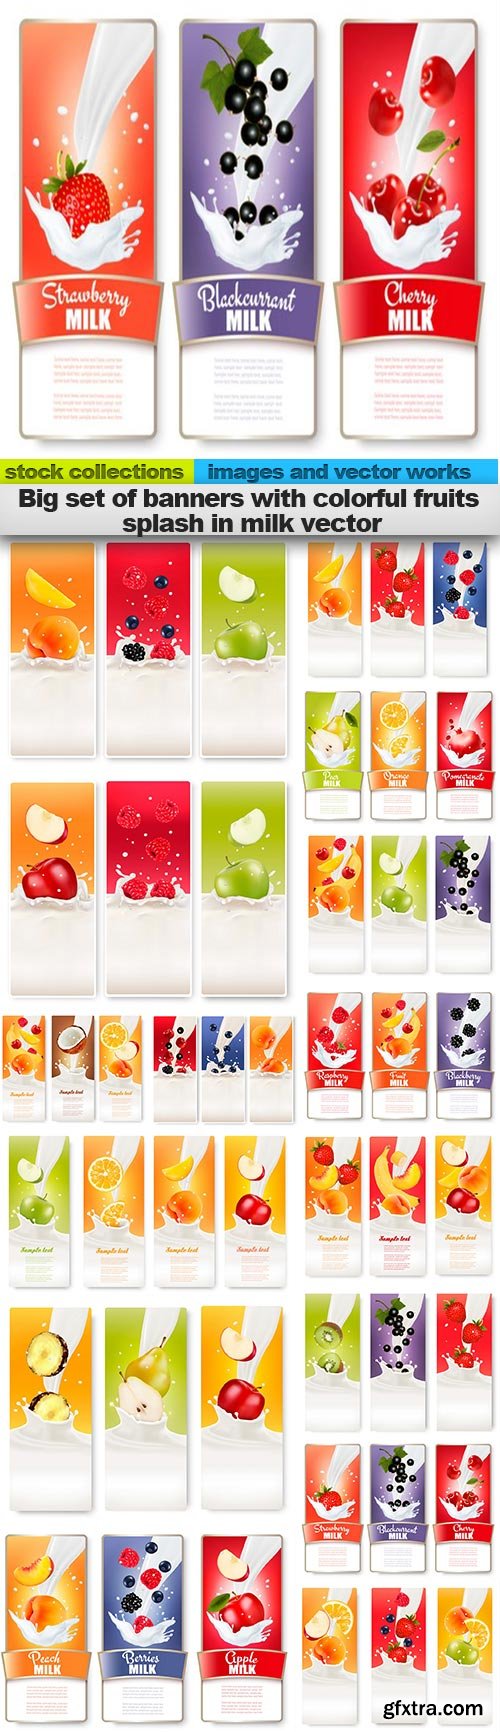 Big set of banners with colorful fruits splash in milk vector, 15 x EPS